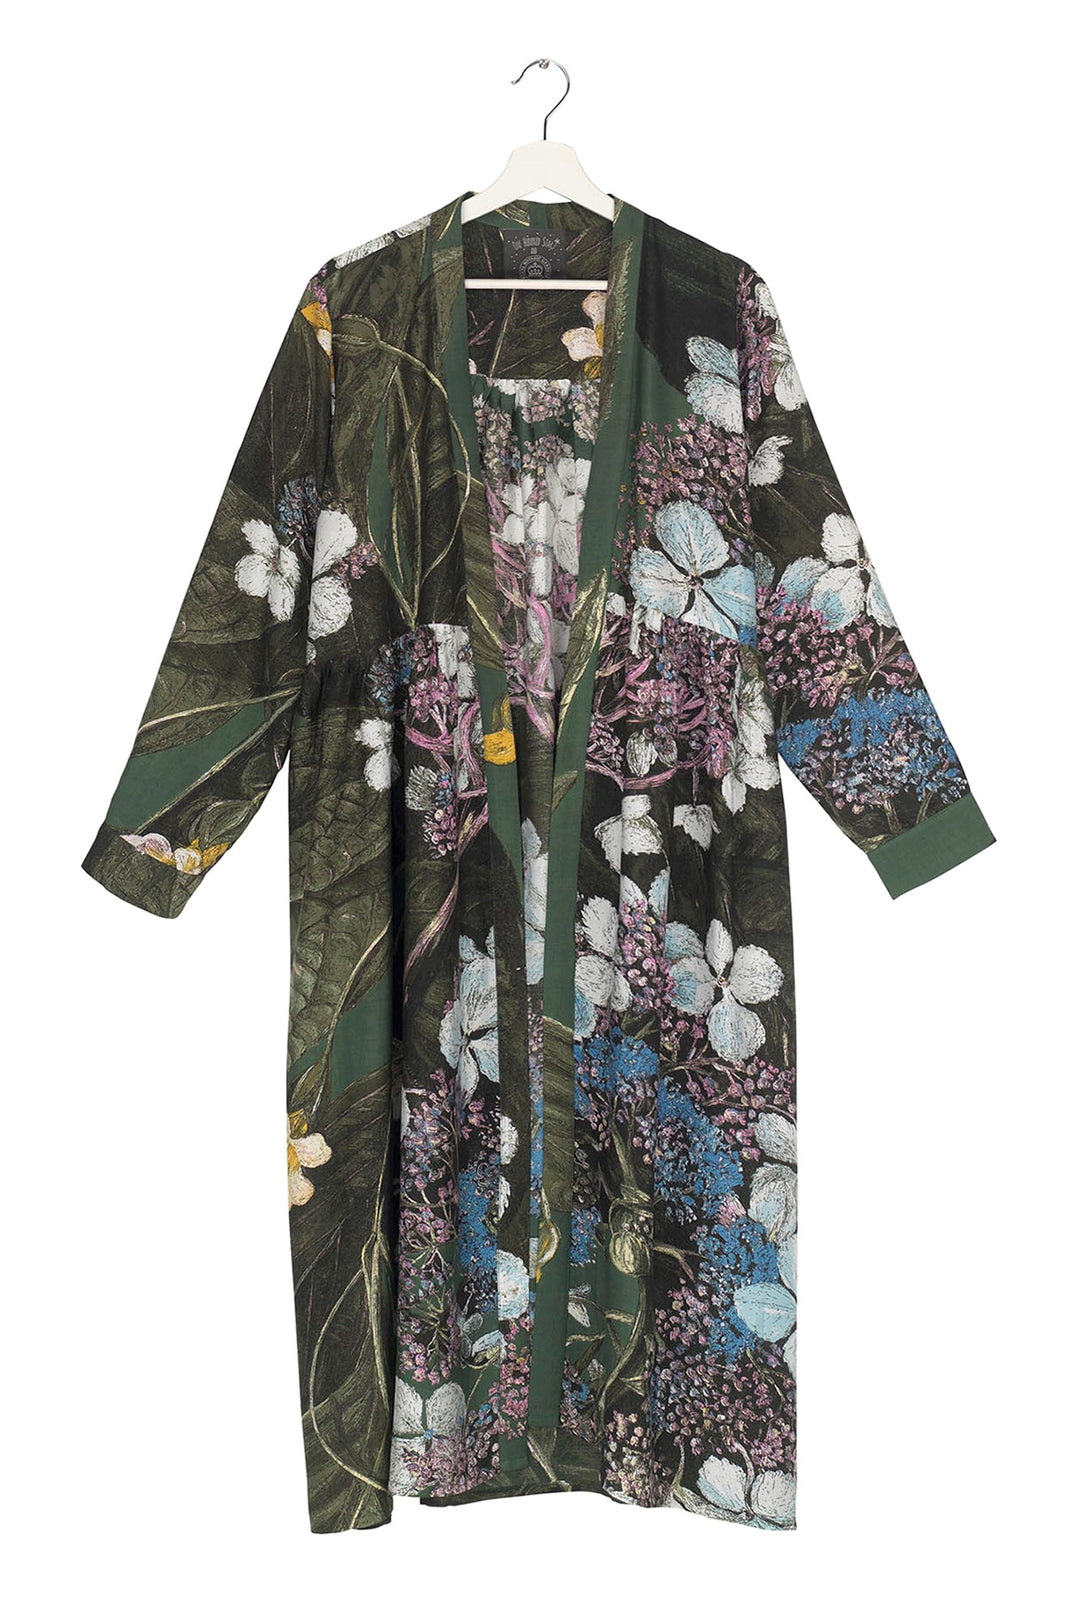 Marianne North Hydrangea Forest Duster Coat- This stunning shape is both stylish and versatile, whether you choose to wear our duster coat as a luxurious house coat, as part of a chic ensemble during the day or over a little black dress during the evening.